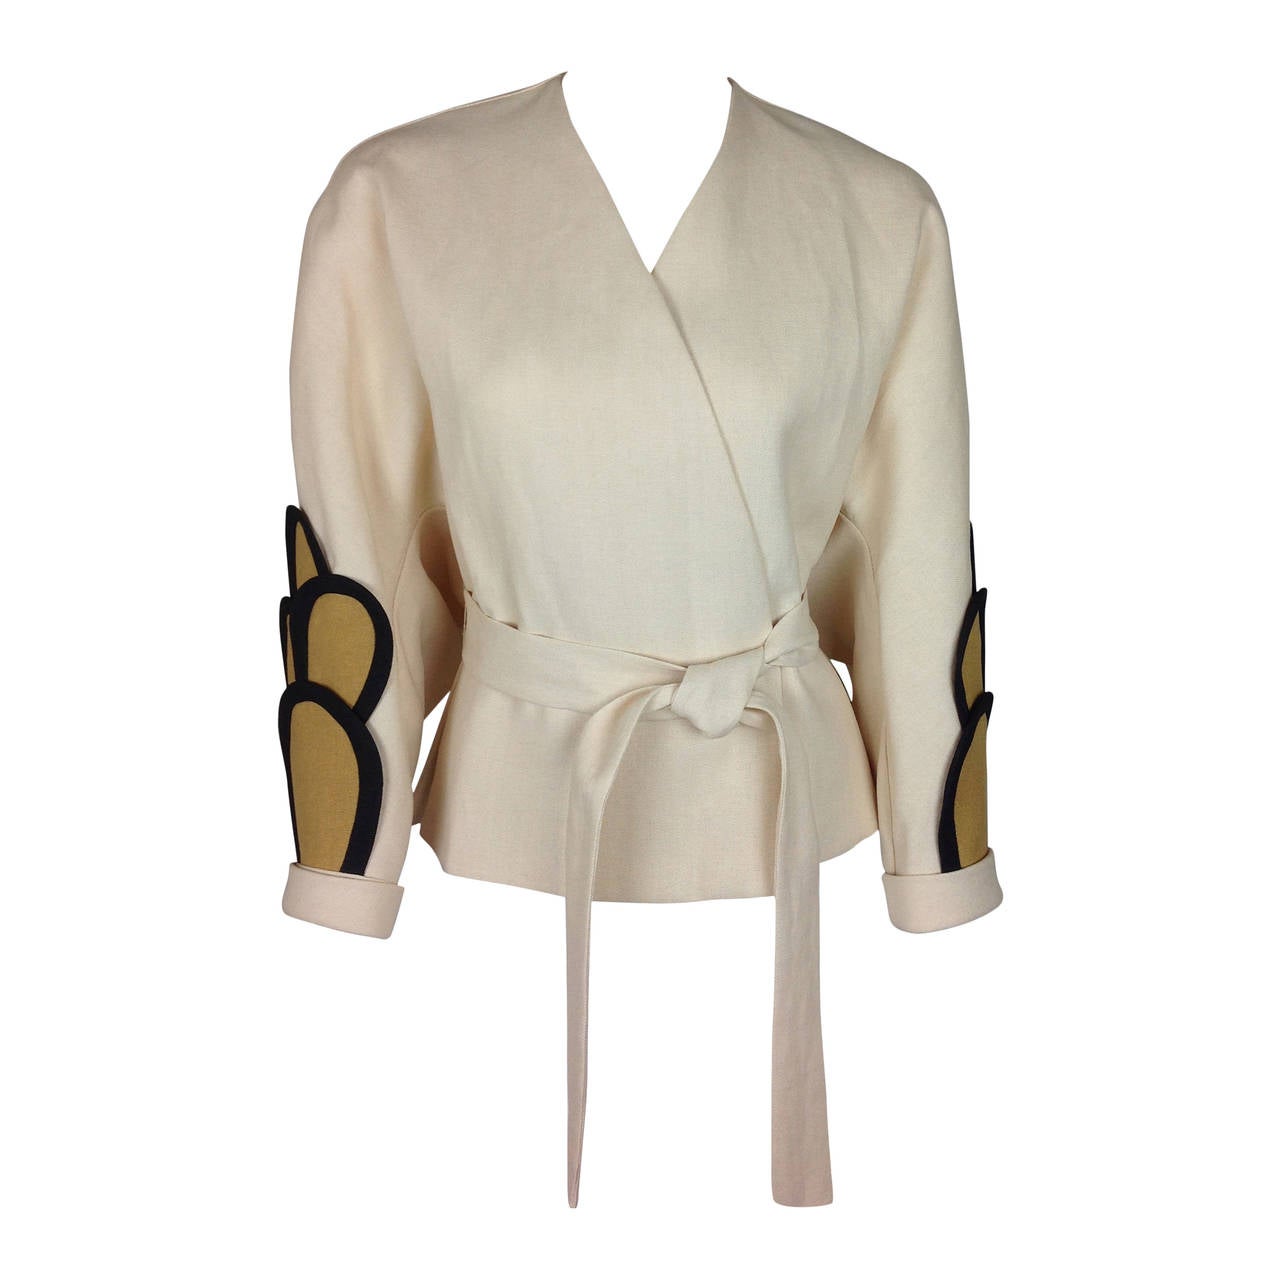 Architectural Delpozo paper/silk jacket          Sold out